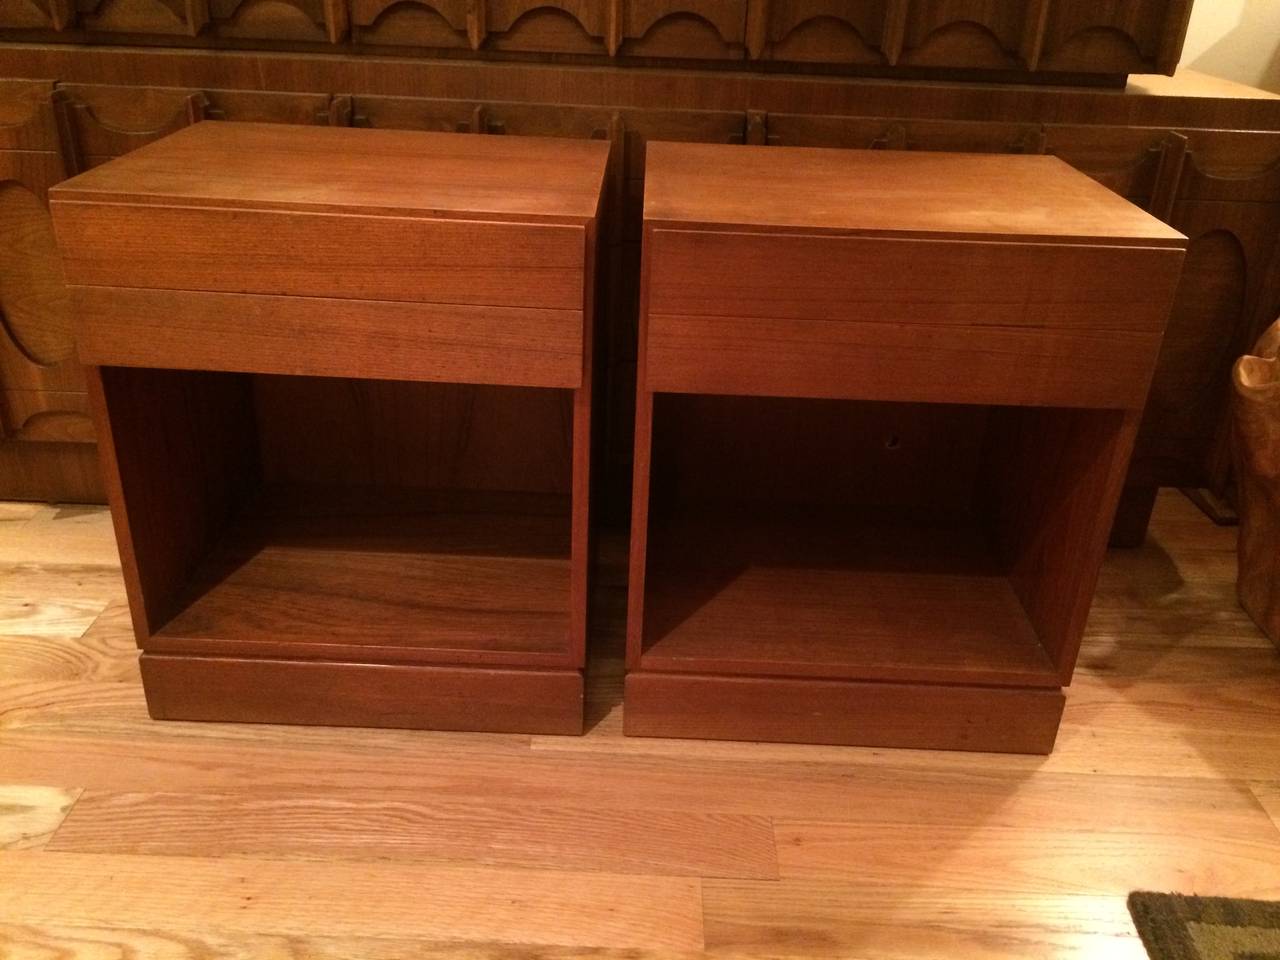 Pair of Danish Teak Nightstands. Signed Danish Makers. These stands have two thin sliced drawers and a cabinet base. Sleek minimal lines define these tables.
 The Danish Furnituremakers’ Quality Control (DFQC) stamp originated in 1959. It ensures